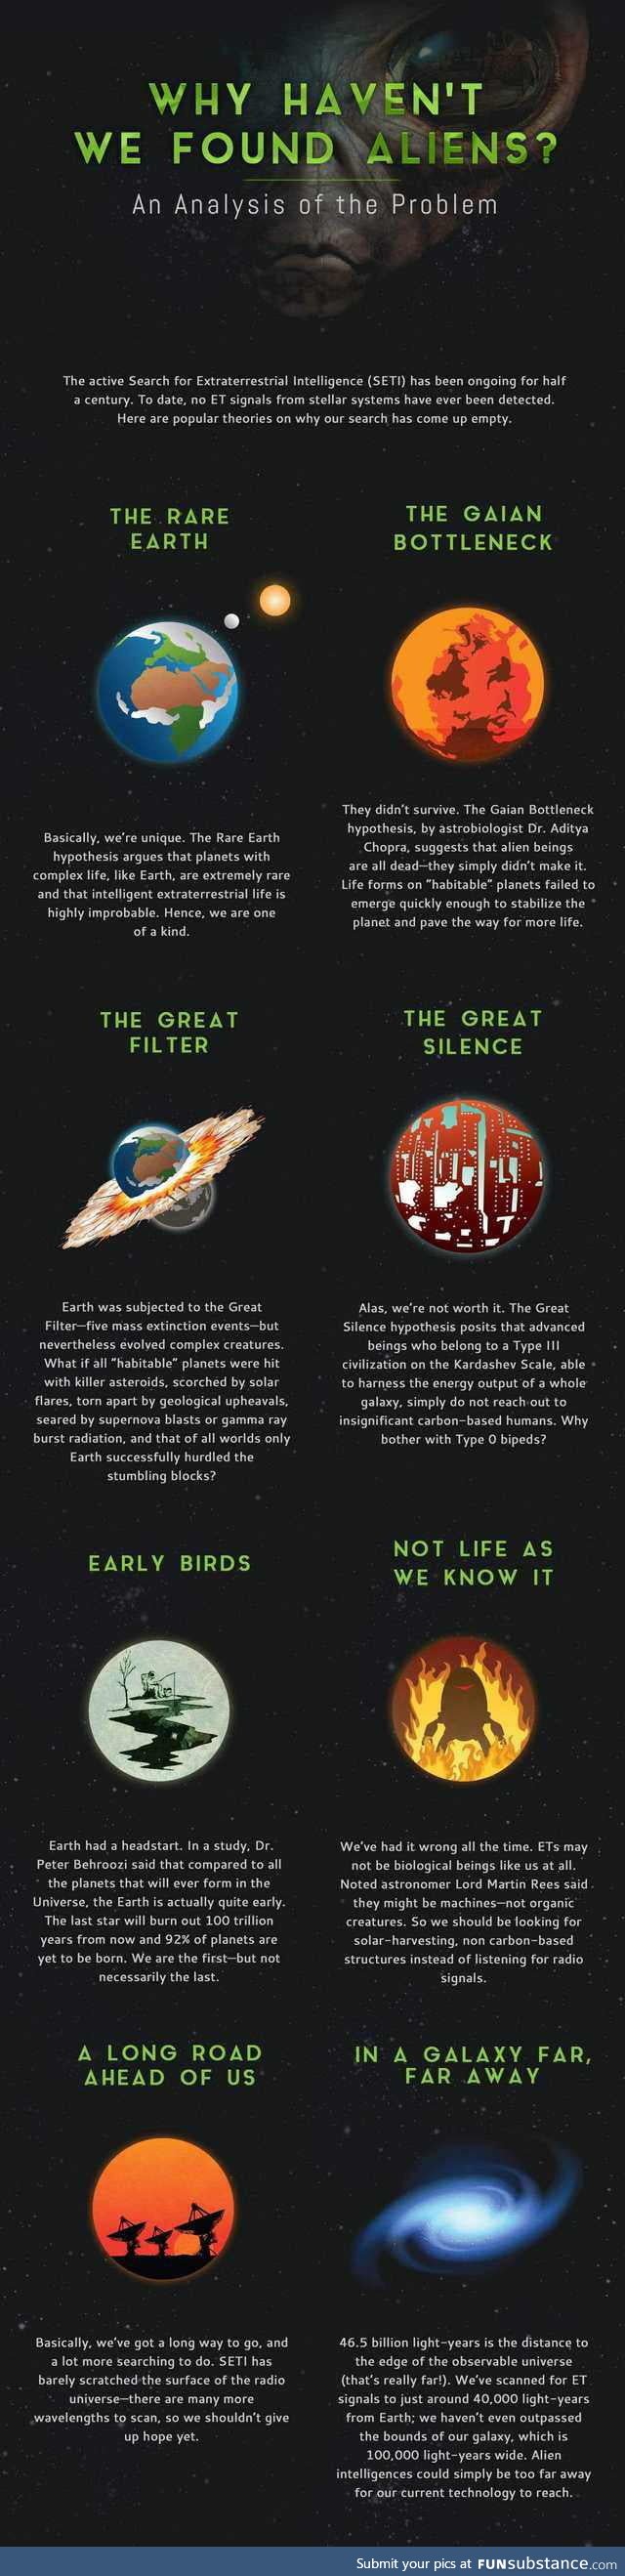 Theories as to why we have not yet made alien contact